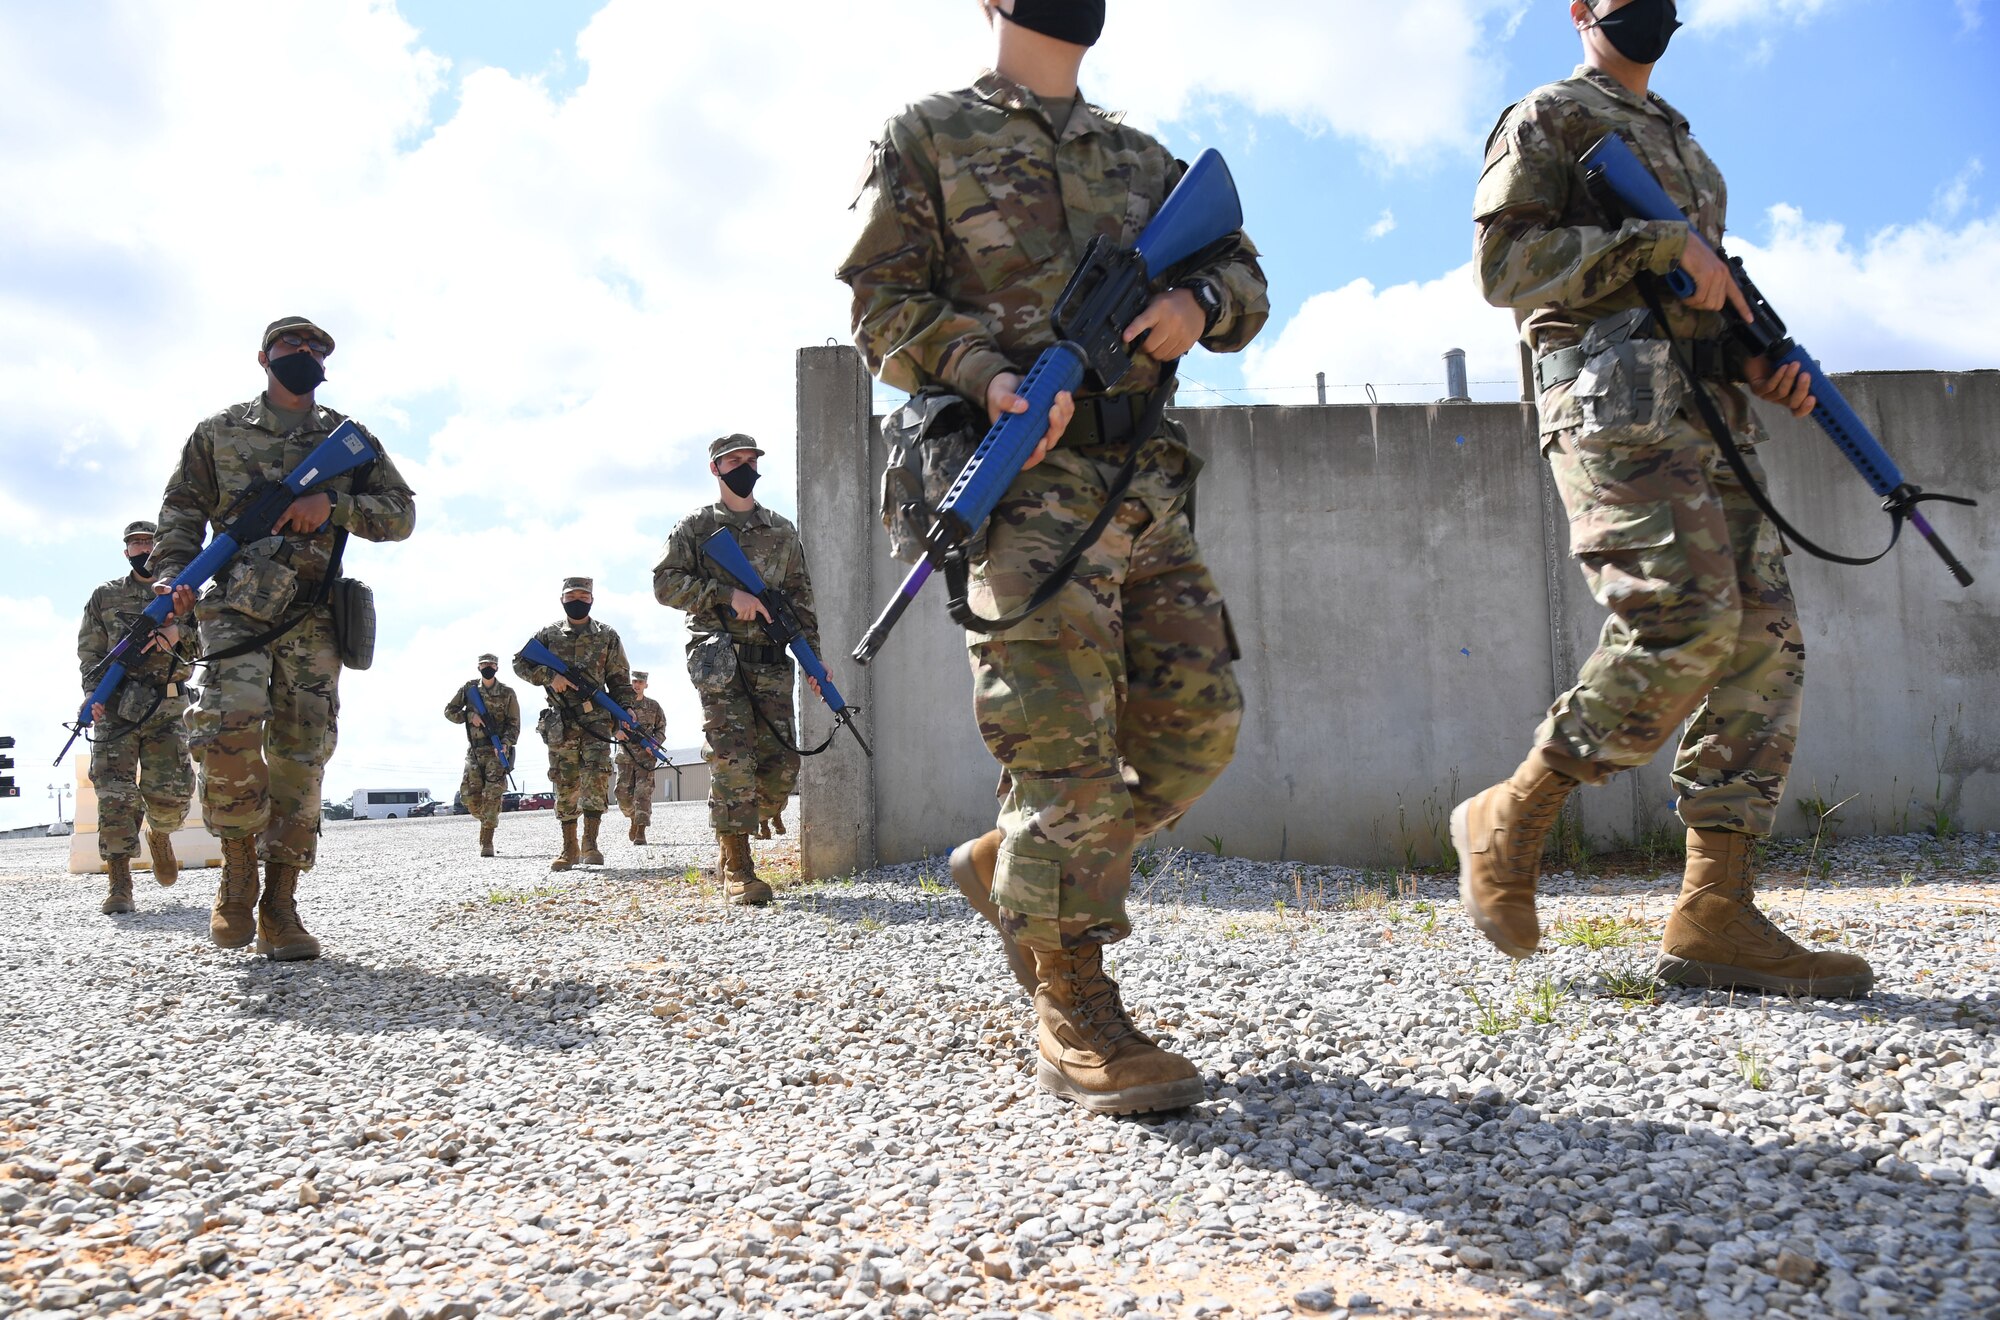 Airmen in formation march with rifles